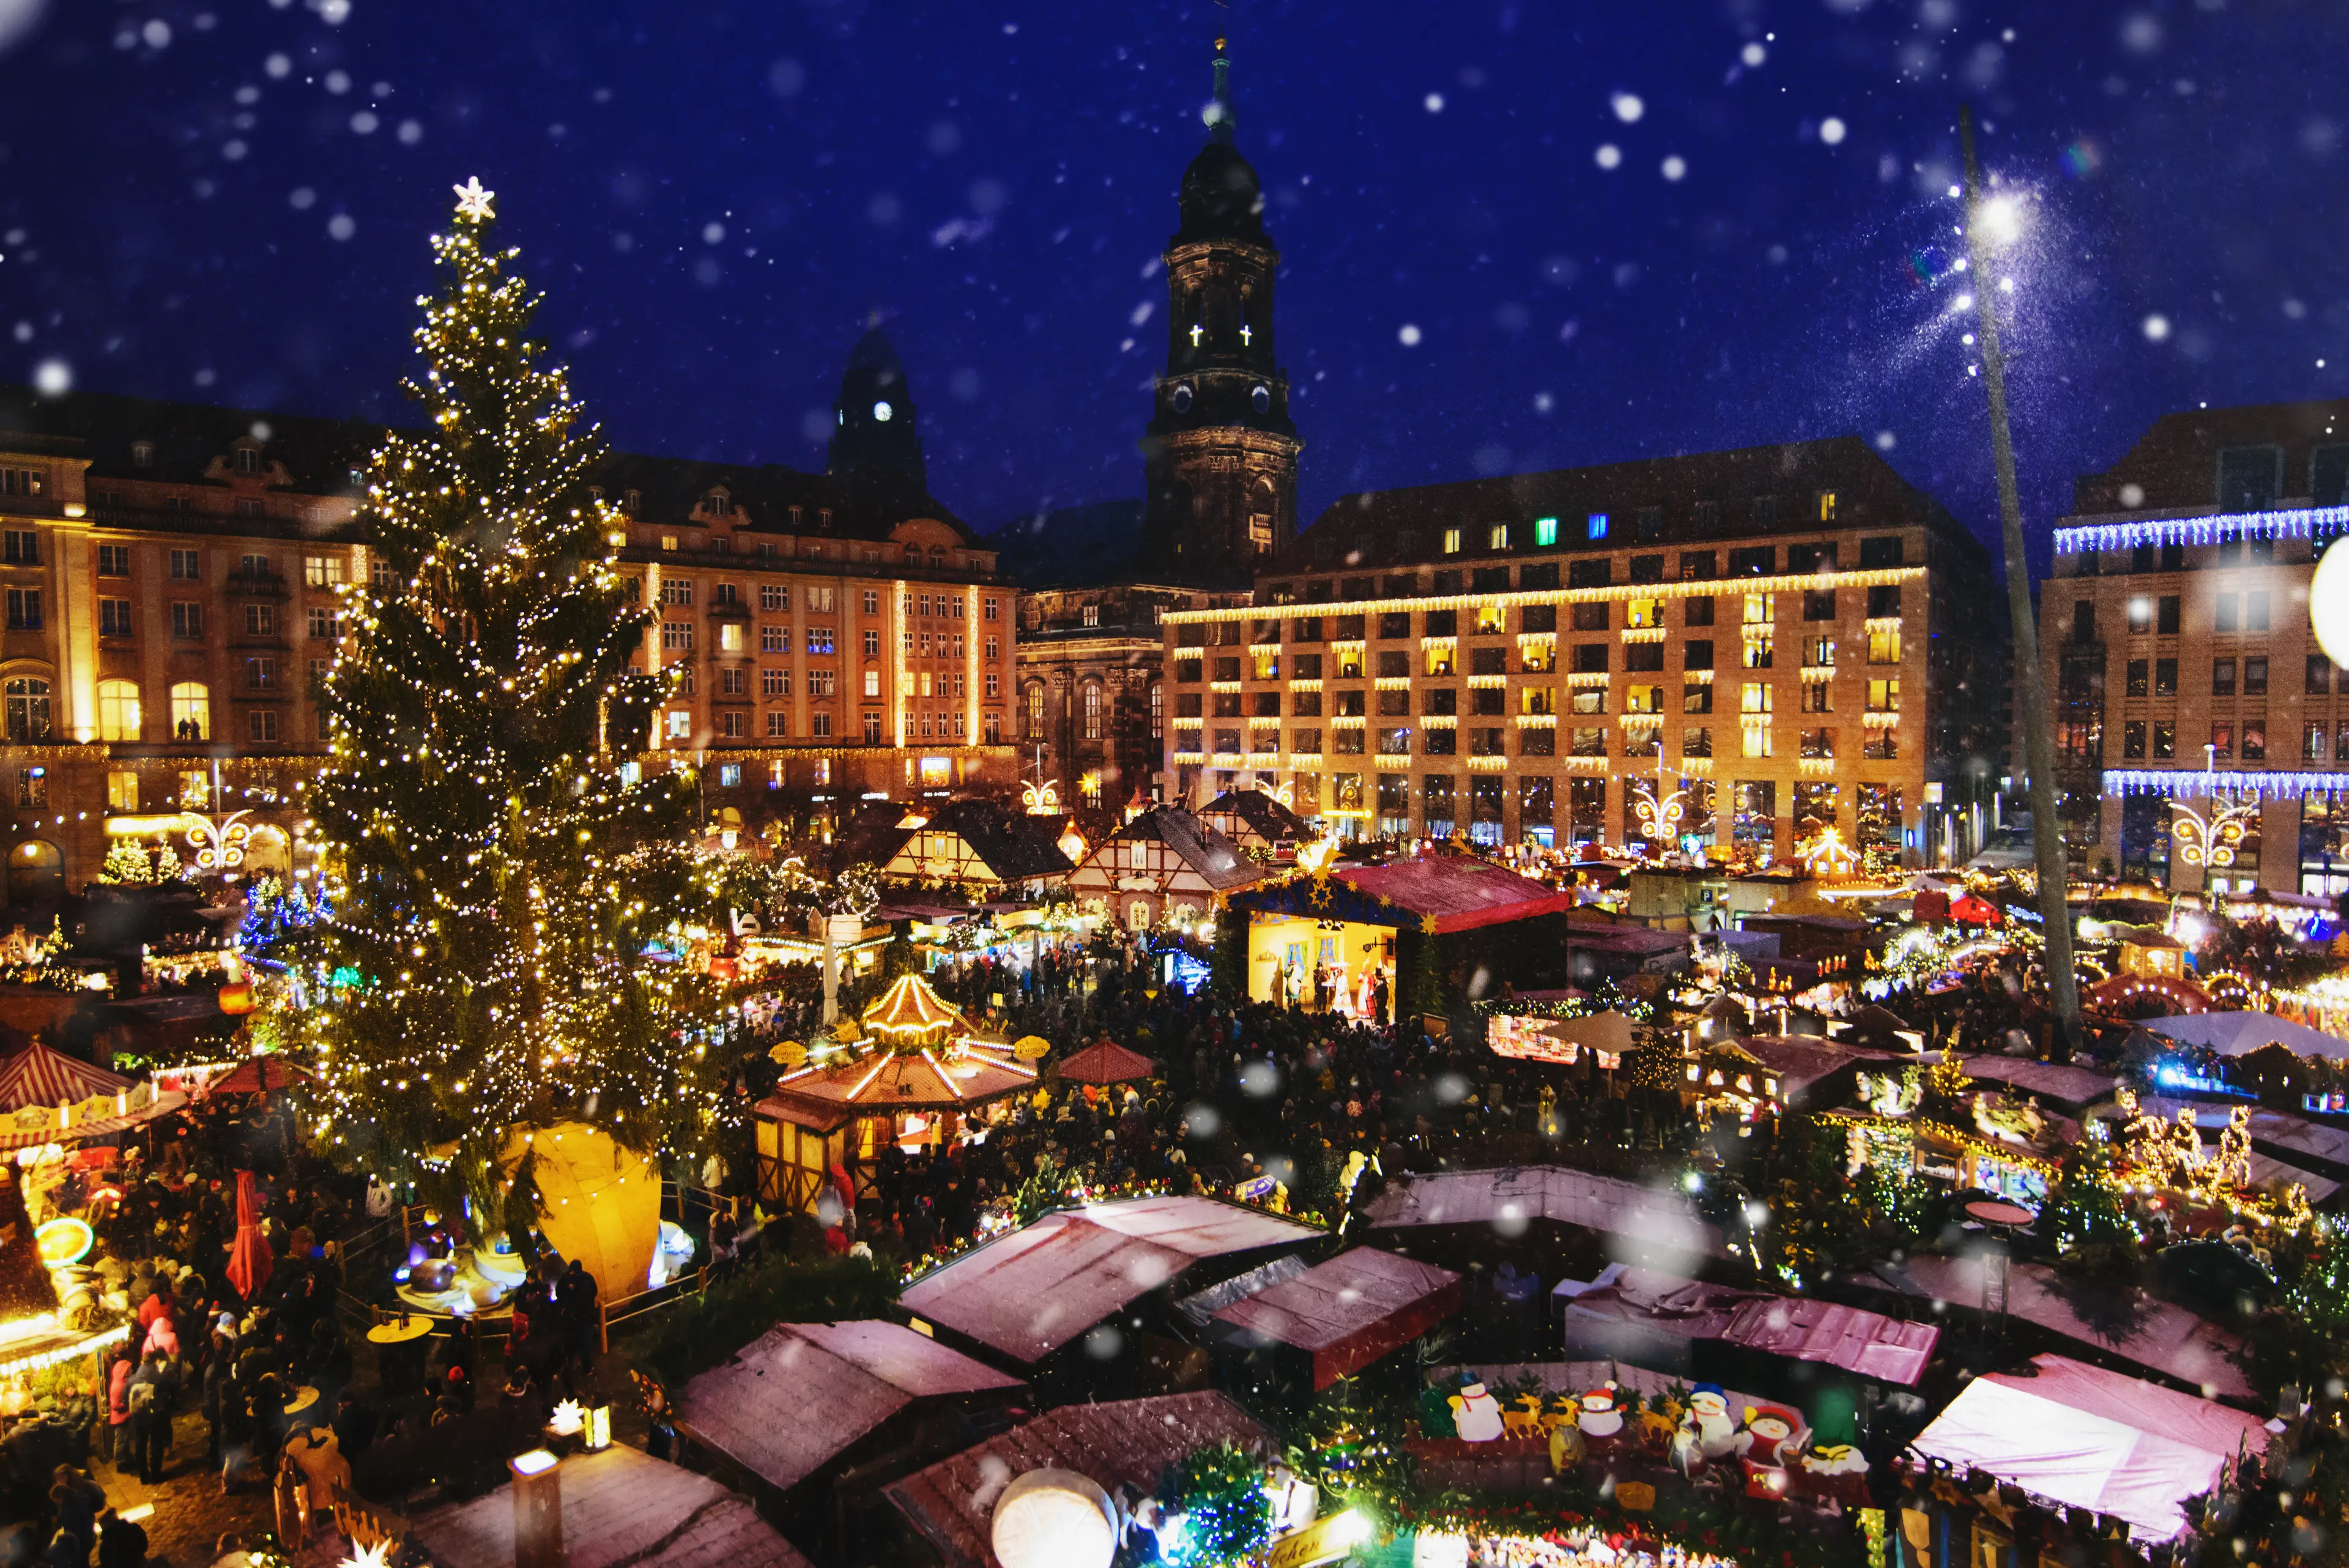 3-Day Romantic Christmas Getaway Itinerary in Dresden, Germany